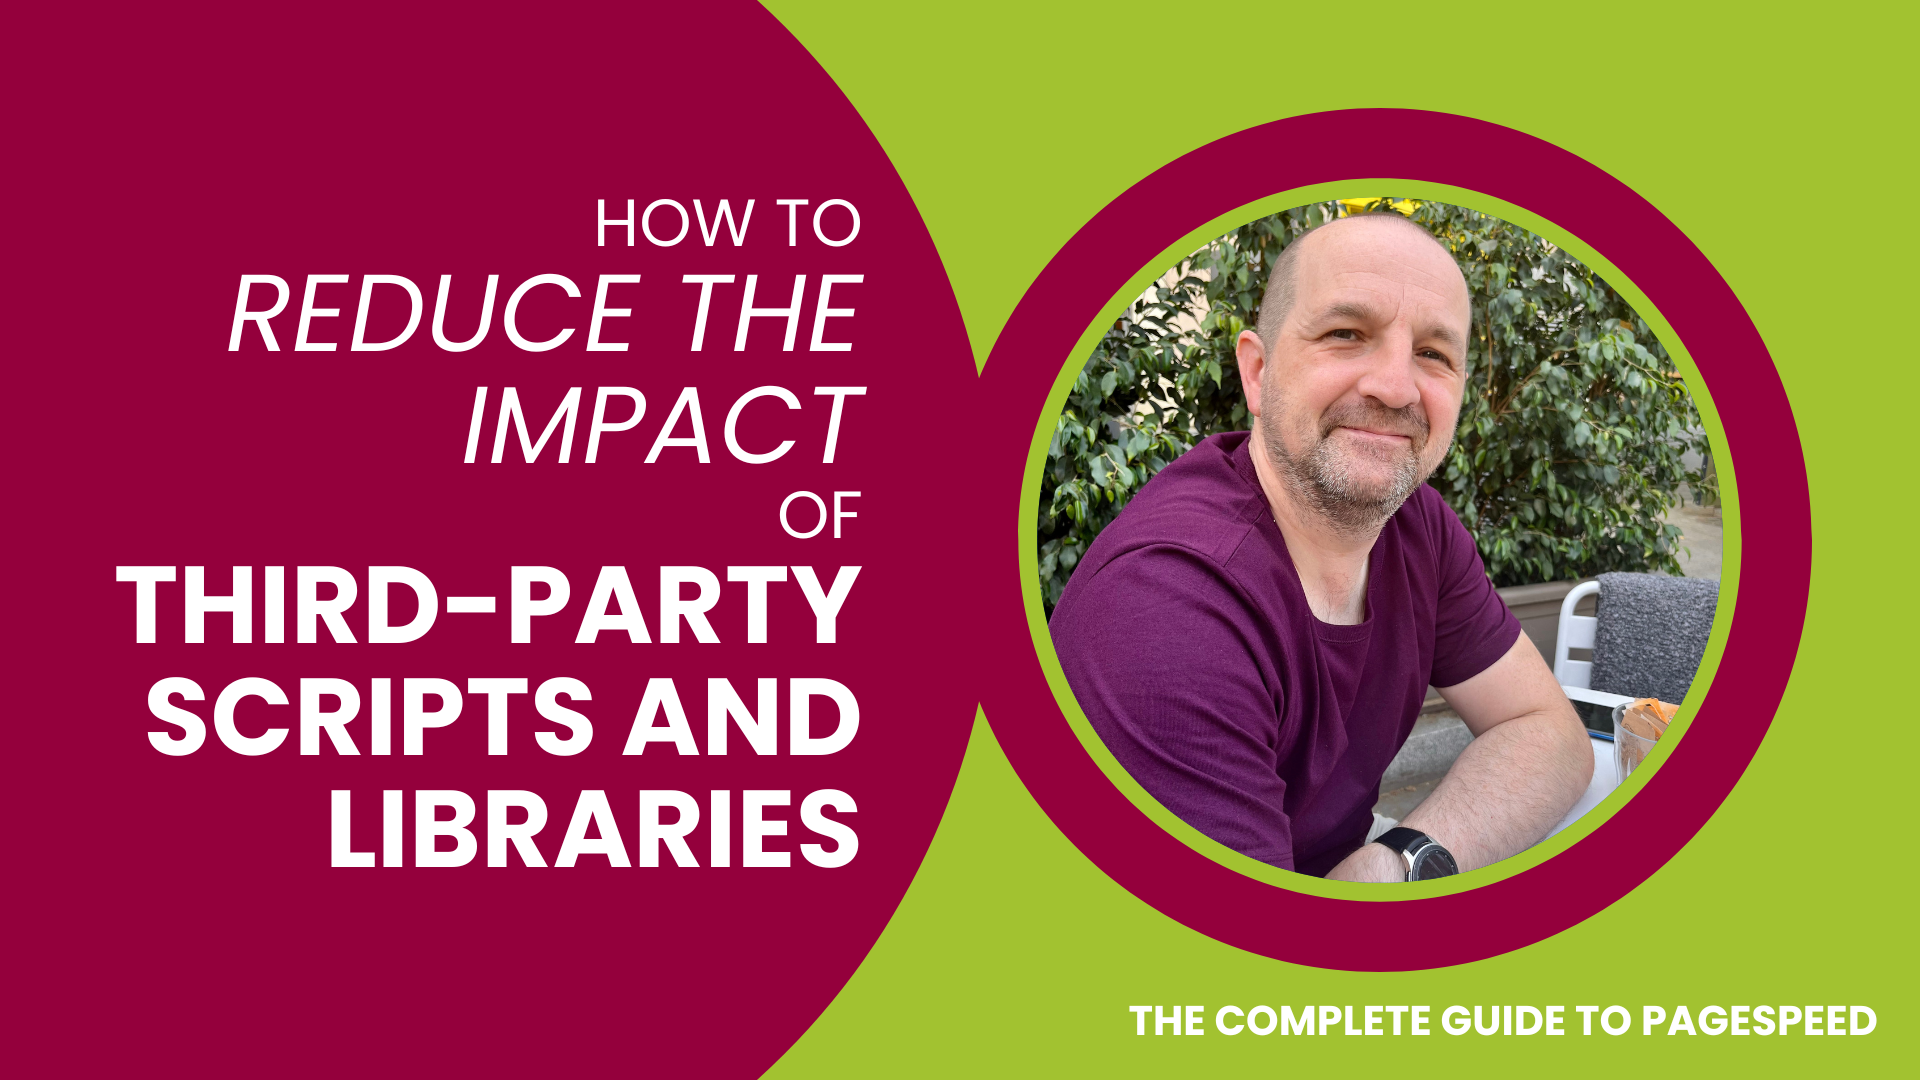 How to Reduce the Impact of Third-Party Scripts and Libraries